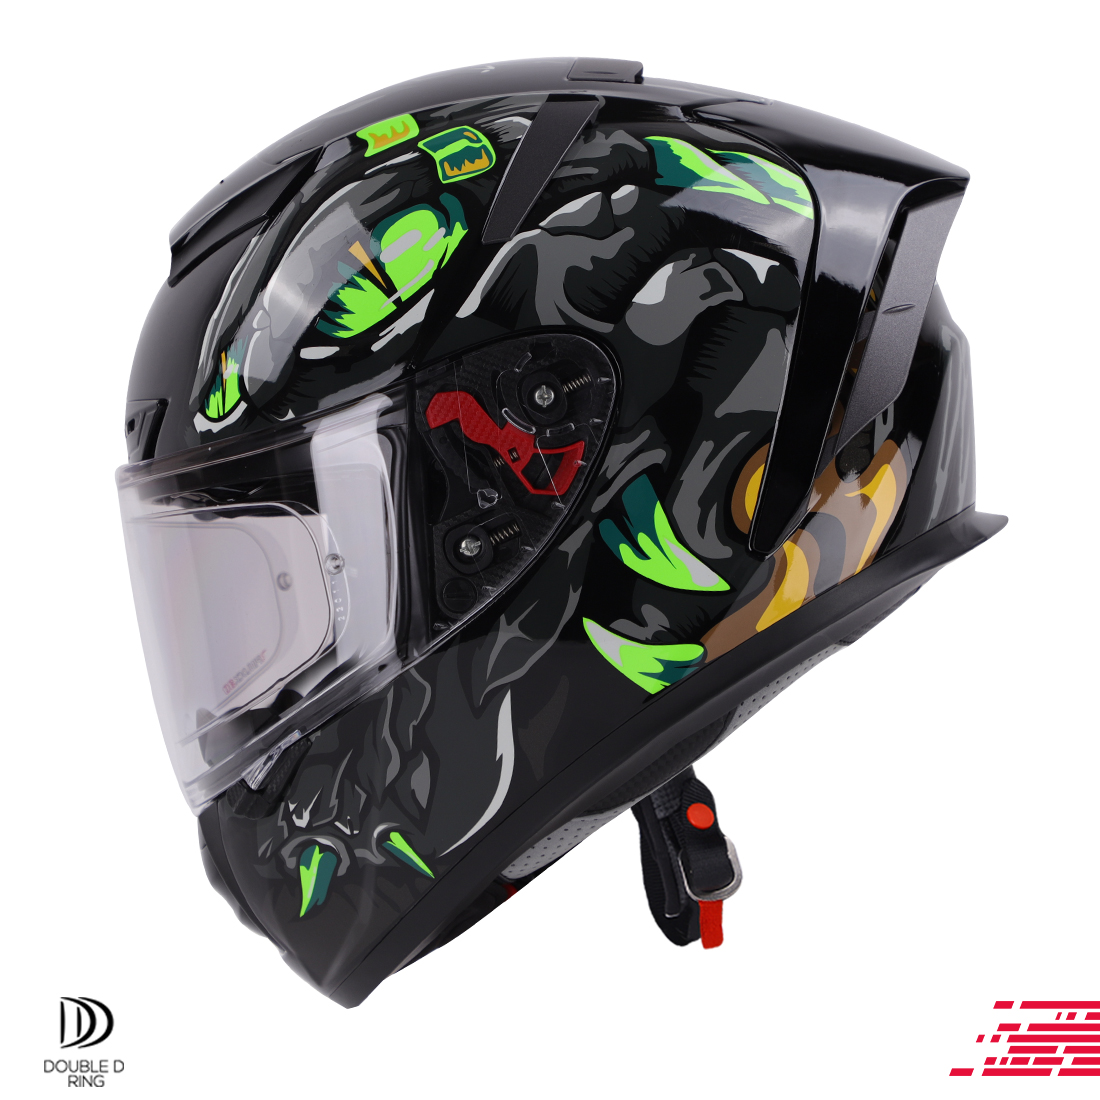 Steelbird SA-5 Monster ISI/DOT Certified Full Face Graphic Helmet With Outer Anti-Fog Clear Visor (Glossy Black Grey)